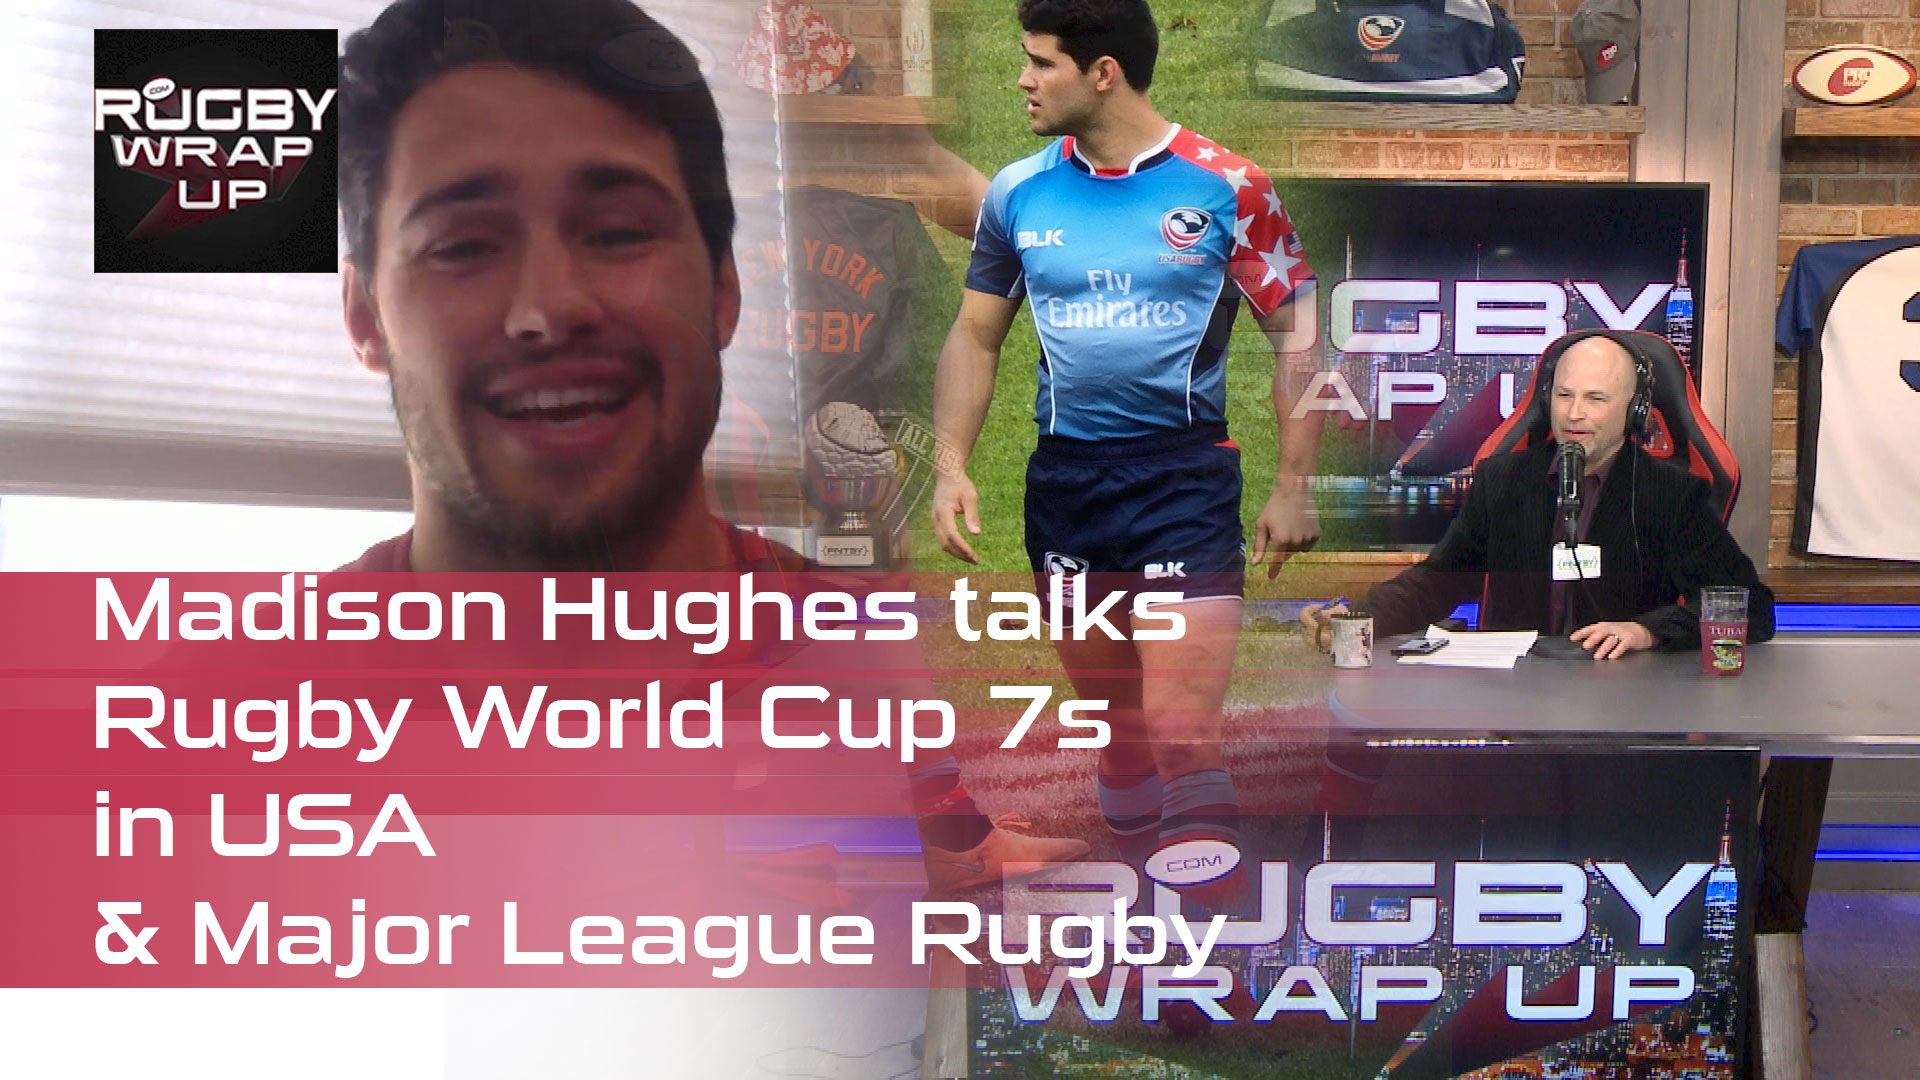 RUGBY TV & Podcast: USA 7s Star Madison Hughes re RWC 7s, Webb Ellis, MLR, Barber Perry Baker